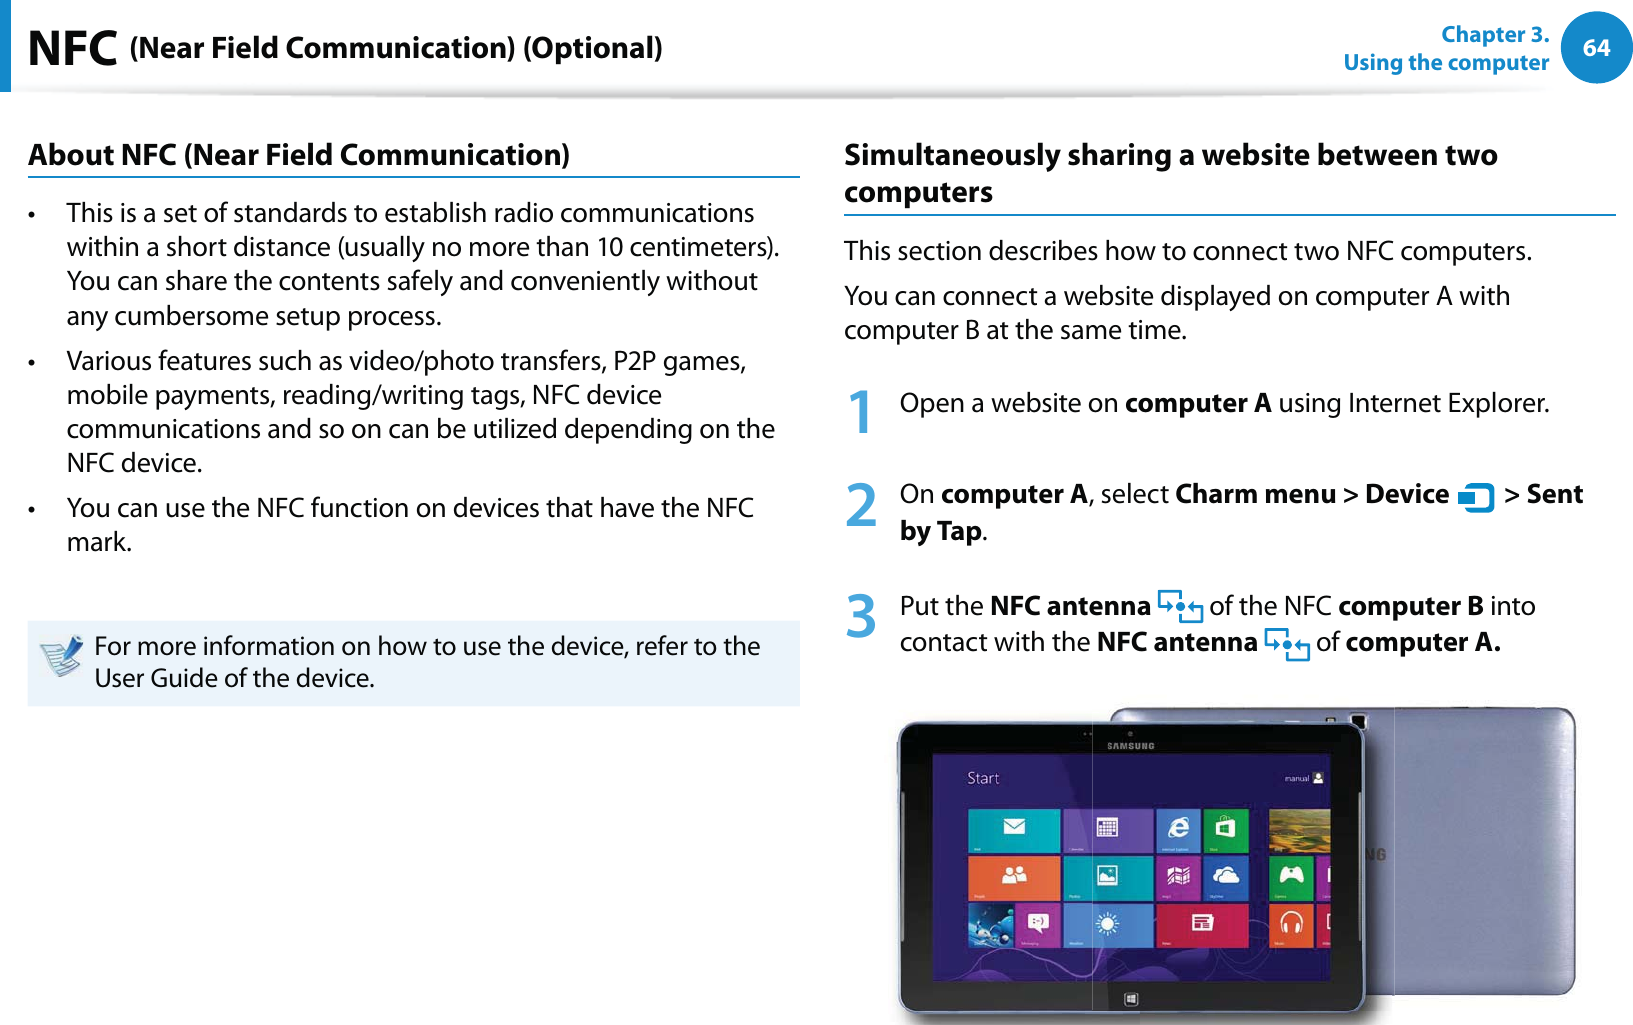 64Chapter 3.  Using the computerNFC (Near Field Communication) (Optional)About NFC (Near Field Communication)This is a set of standards to establish radio communications t within a short distance (usually no more than 10 centimeters).  You can share the contents safely and conveniently without any cumbersome setup process.Various features such as video/photo transfers, P2P games, t mobile payments, reading/writing tags, NFC device communications and so on can be utilized depending on the NFC device. You can use the NFC function on devices that have the NFC t mark.For more information on how to use the device, refer to the User Guide of the device.Simultaneously sharing a website between two computersThis section describes how to connect two NFC computers.You can connect a website displayed on computer A with computer B at the same time.1  Open a website on computer A using Internet Explorer.2 On computer A, select Charm menu &gt; Device   &gt; Sent by Tap.3 Put the NFC antenna   of the NFC computer B into contact with the NFC antenna  of computer A.